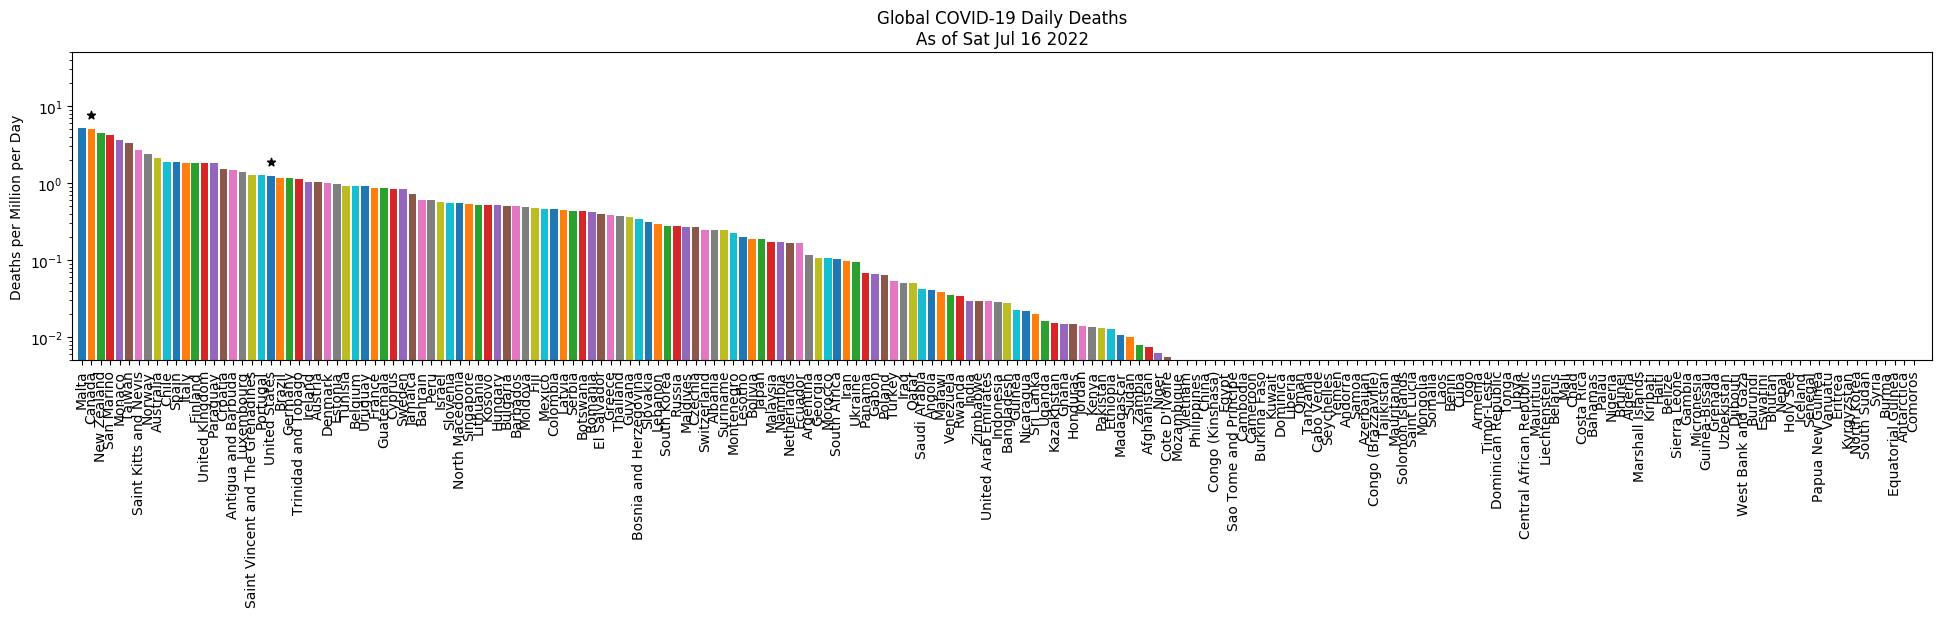 Current 7-day average deaths per million per day for each country